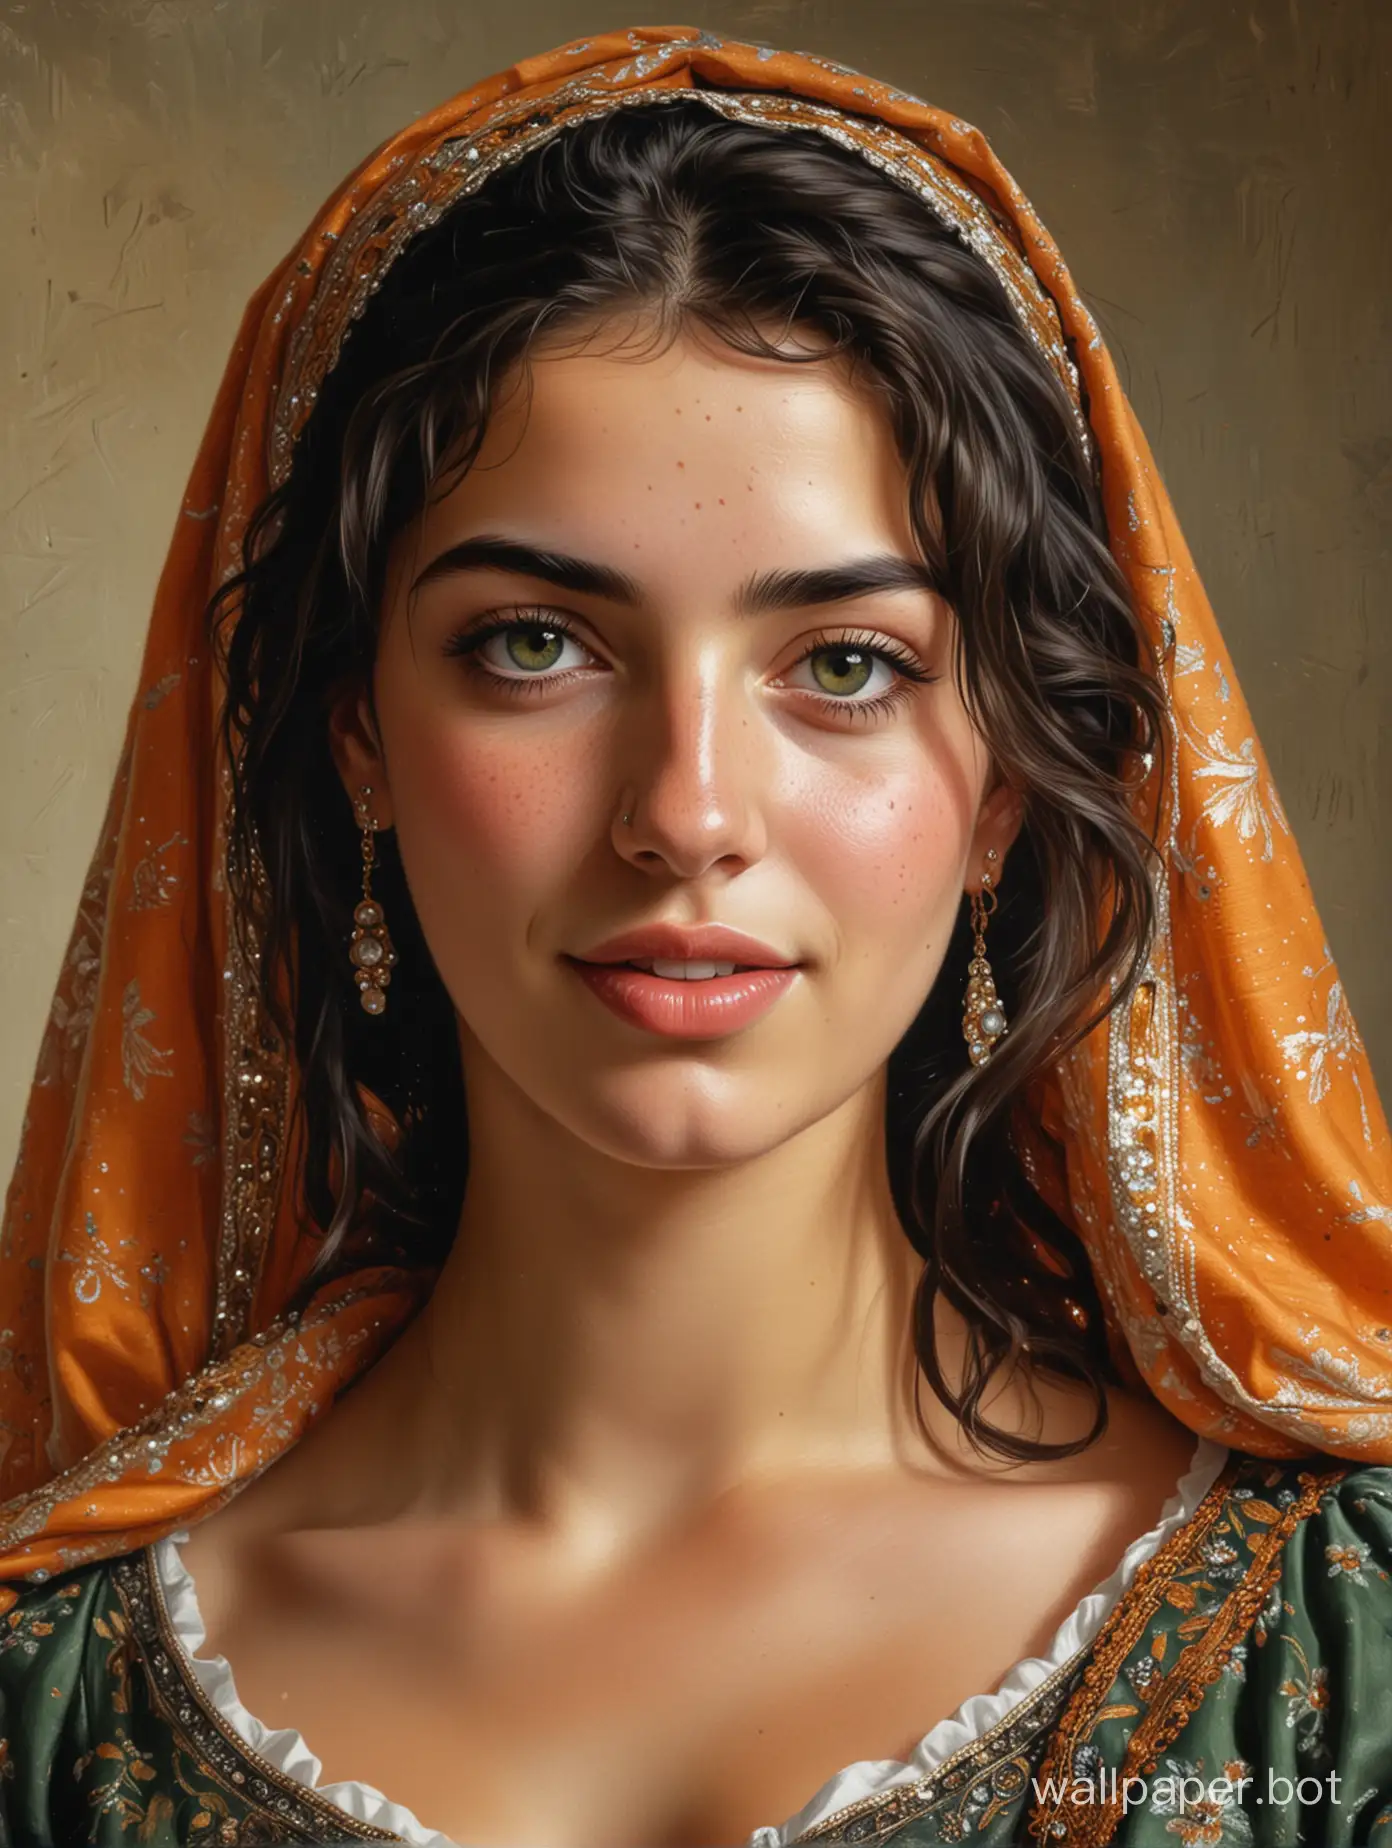 velazquez painting style, full body perspective, low angle portrait of a beautiful 22 year old Palestinian woman standing, view from below, she is pretty, she has green eyes, she has olive skin, she has lots of freckles, midriff, skinny, abs, muscular legs, deep plunging v, she has long light black hair that is wavy, wearing an orange headscarf, sequins, bejeweled fabric, she has a beautiful innocent face, smiling, beaming, big nose, very cute, perfect, sense of wonder, Velazquez painting style